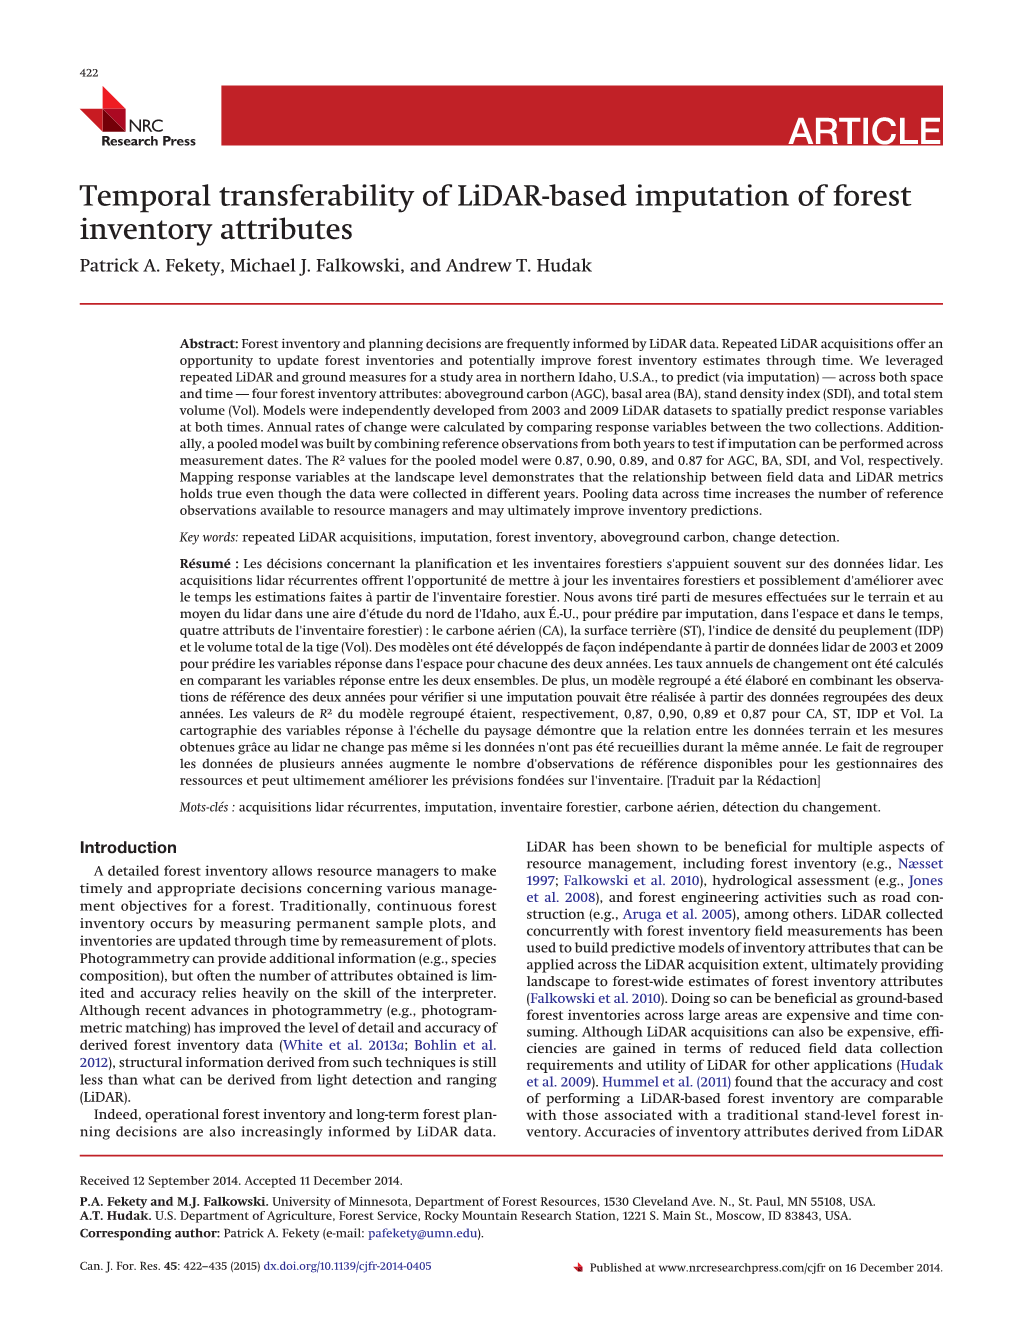 Temporal Transferability of Lidar‐Based Imputation of Forest